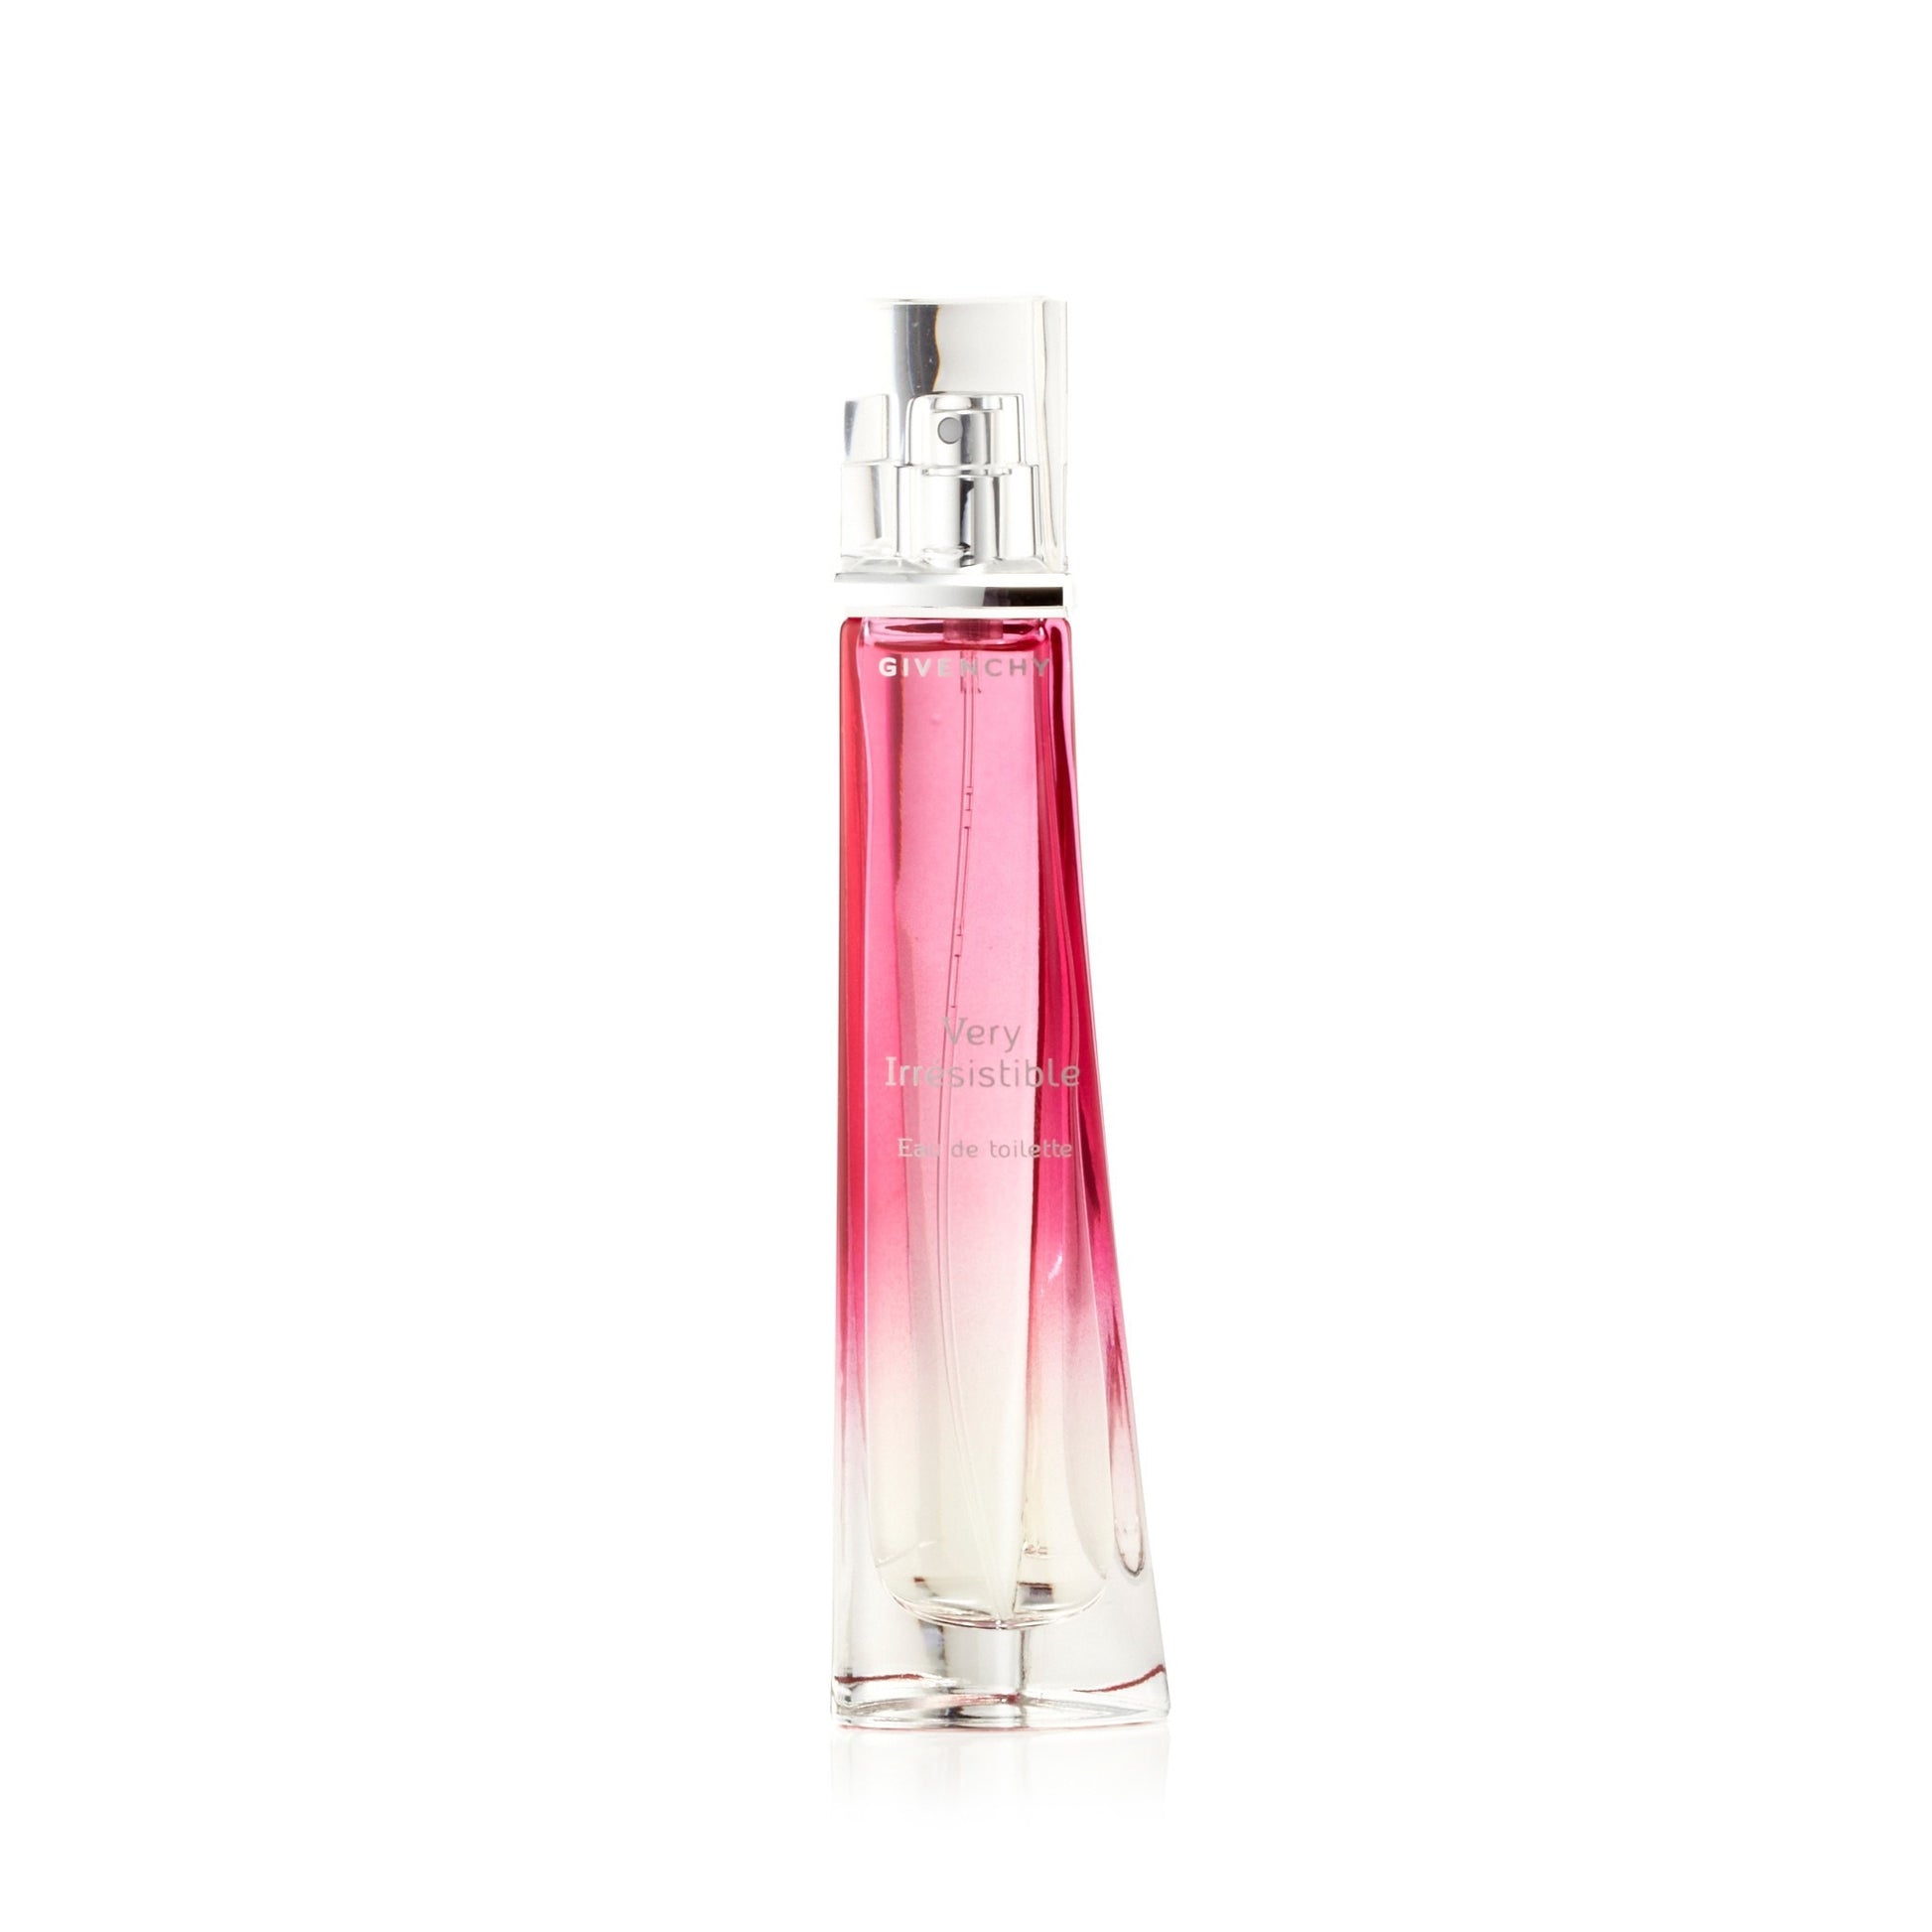  Very Irresistible Eau de Toilette Spray for Women by Givenchy 1.7 oz. Click to open in modal